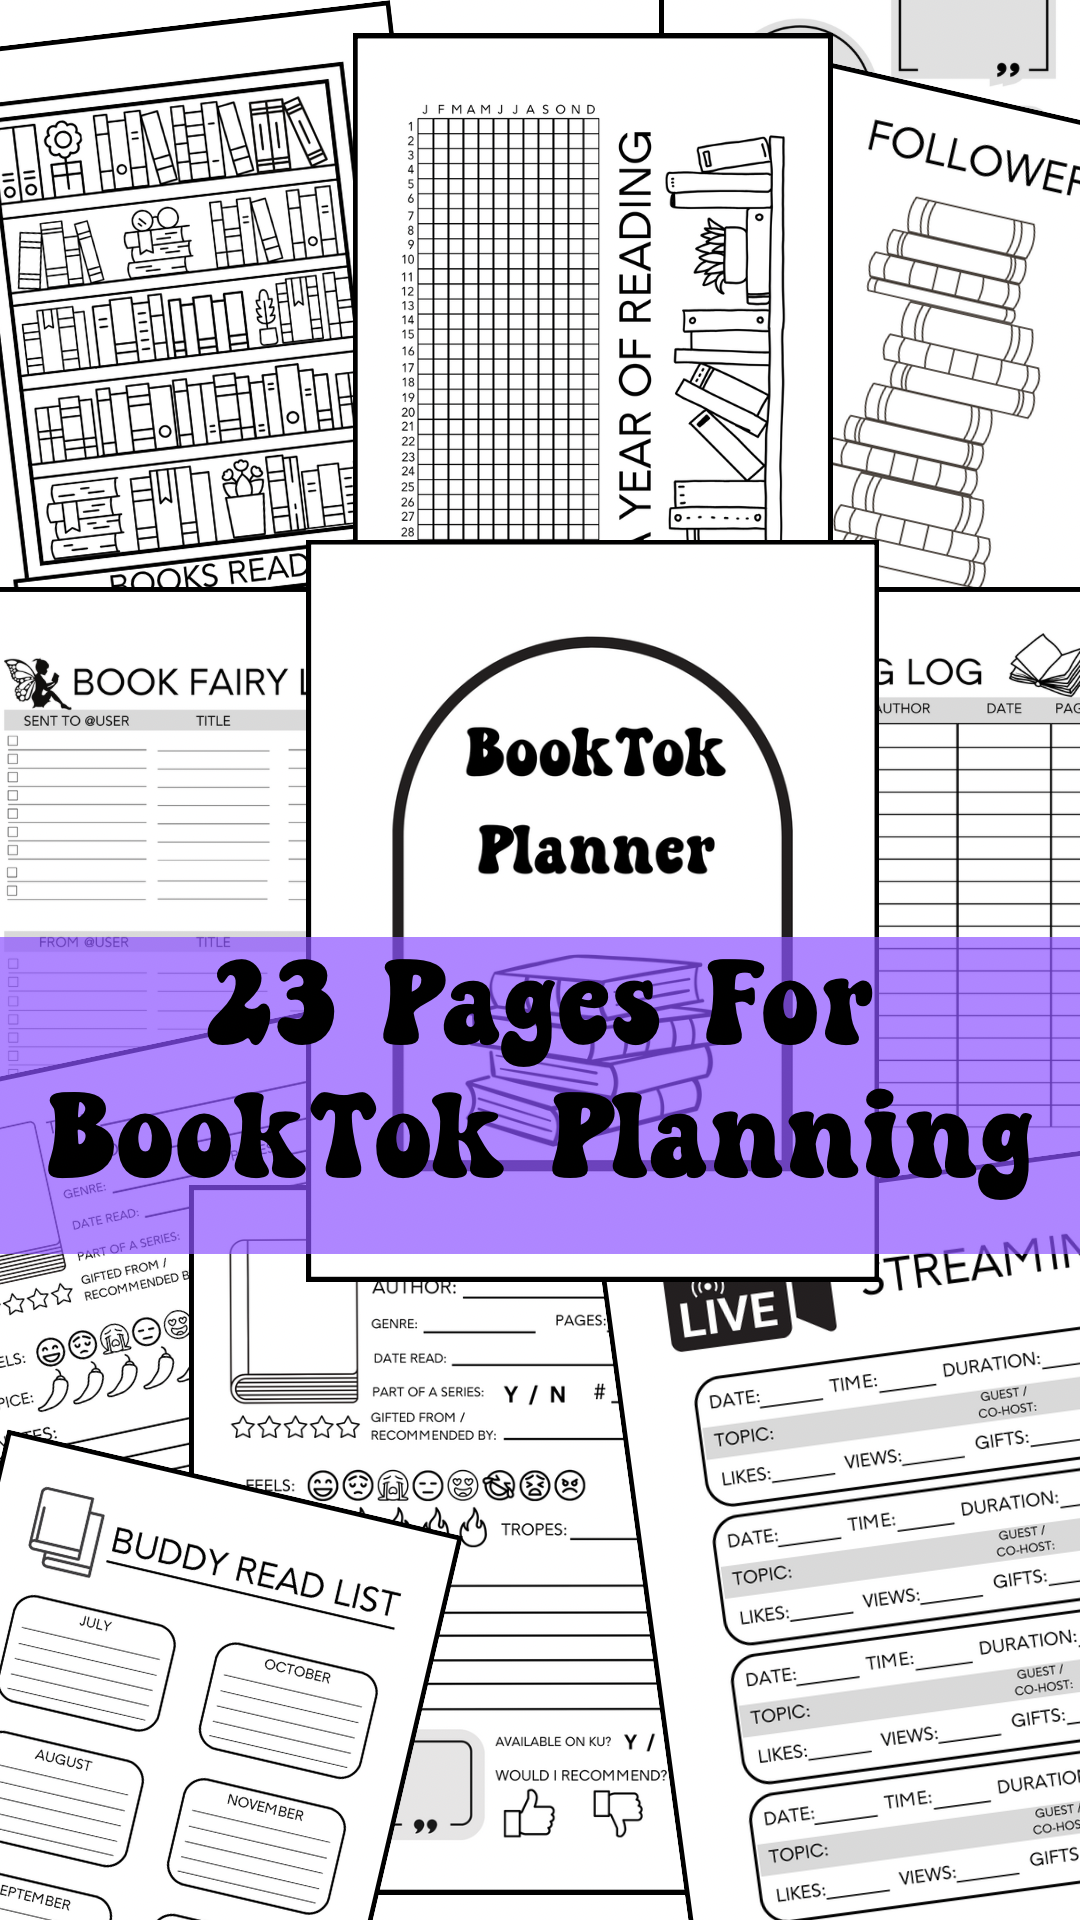 BookTok Planner - 23 unique pages for download - print or use digitally